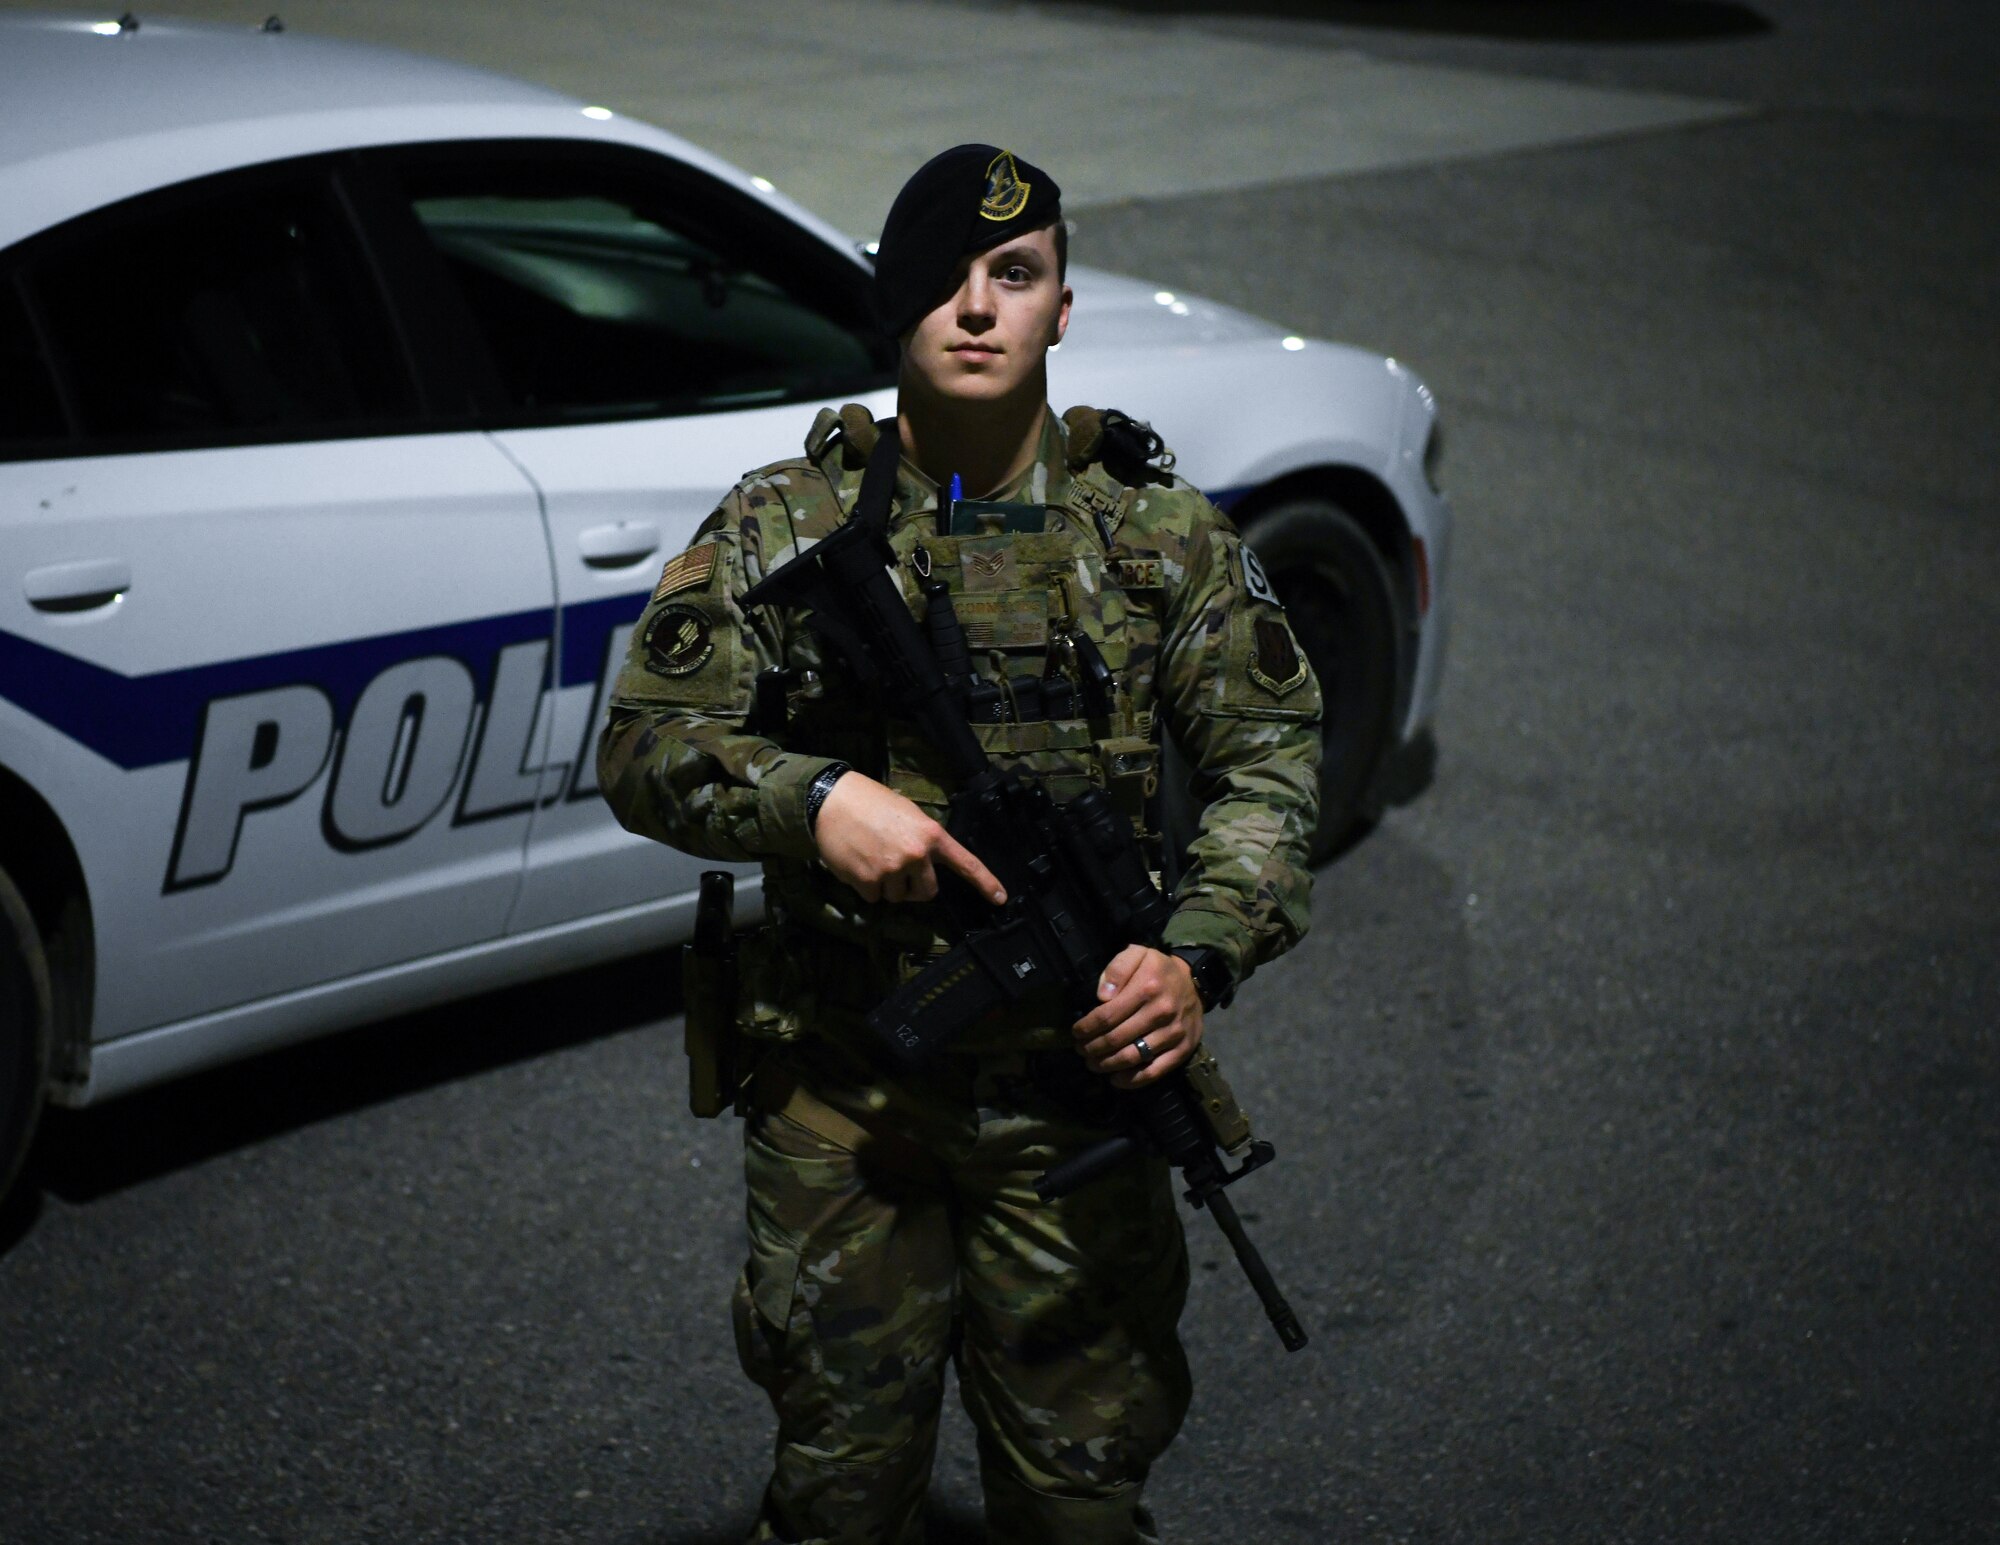 Staff Sgt. Jonathan Cornelius, Base Defense Operations Center controller assigned to the 319th Security Forces Squadron, stands fully equipped for his patrol shift beside a Security Forces vehicle on Grand Forks Air Force Base, N.D., Sep. 23, 2021. Security Forces personnel safeguard Airmen and their families on Grand Forks Air Force Base to ensure the success of the surveillance and reconnaissance mission. (U.S. Air Force photo by Airman 1st Class Jack LeGrand)